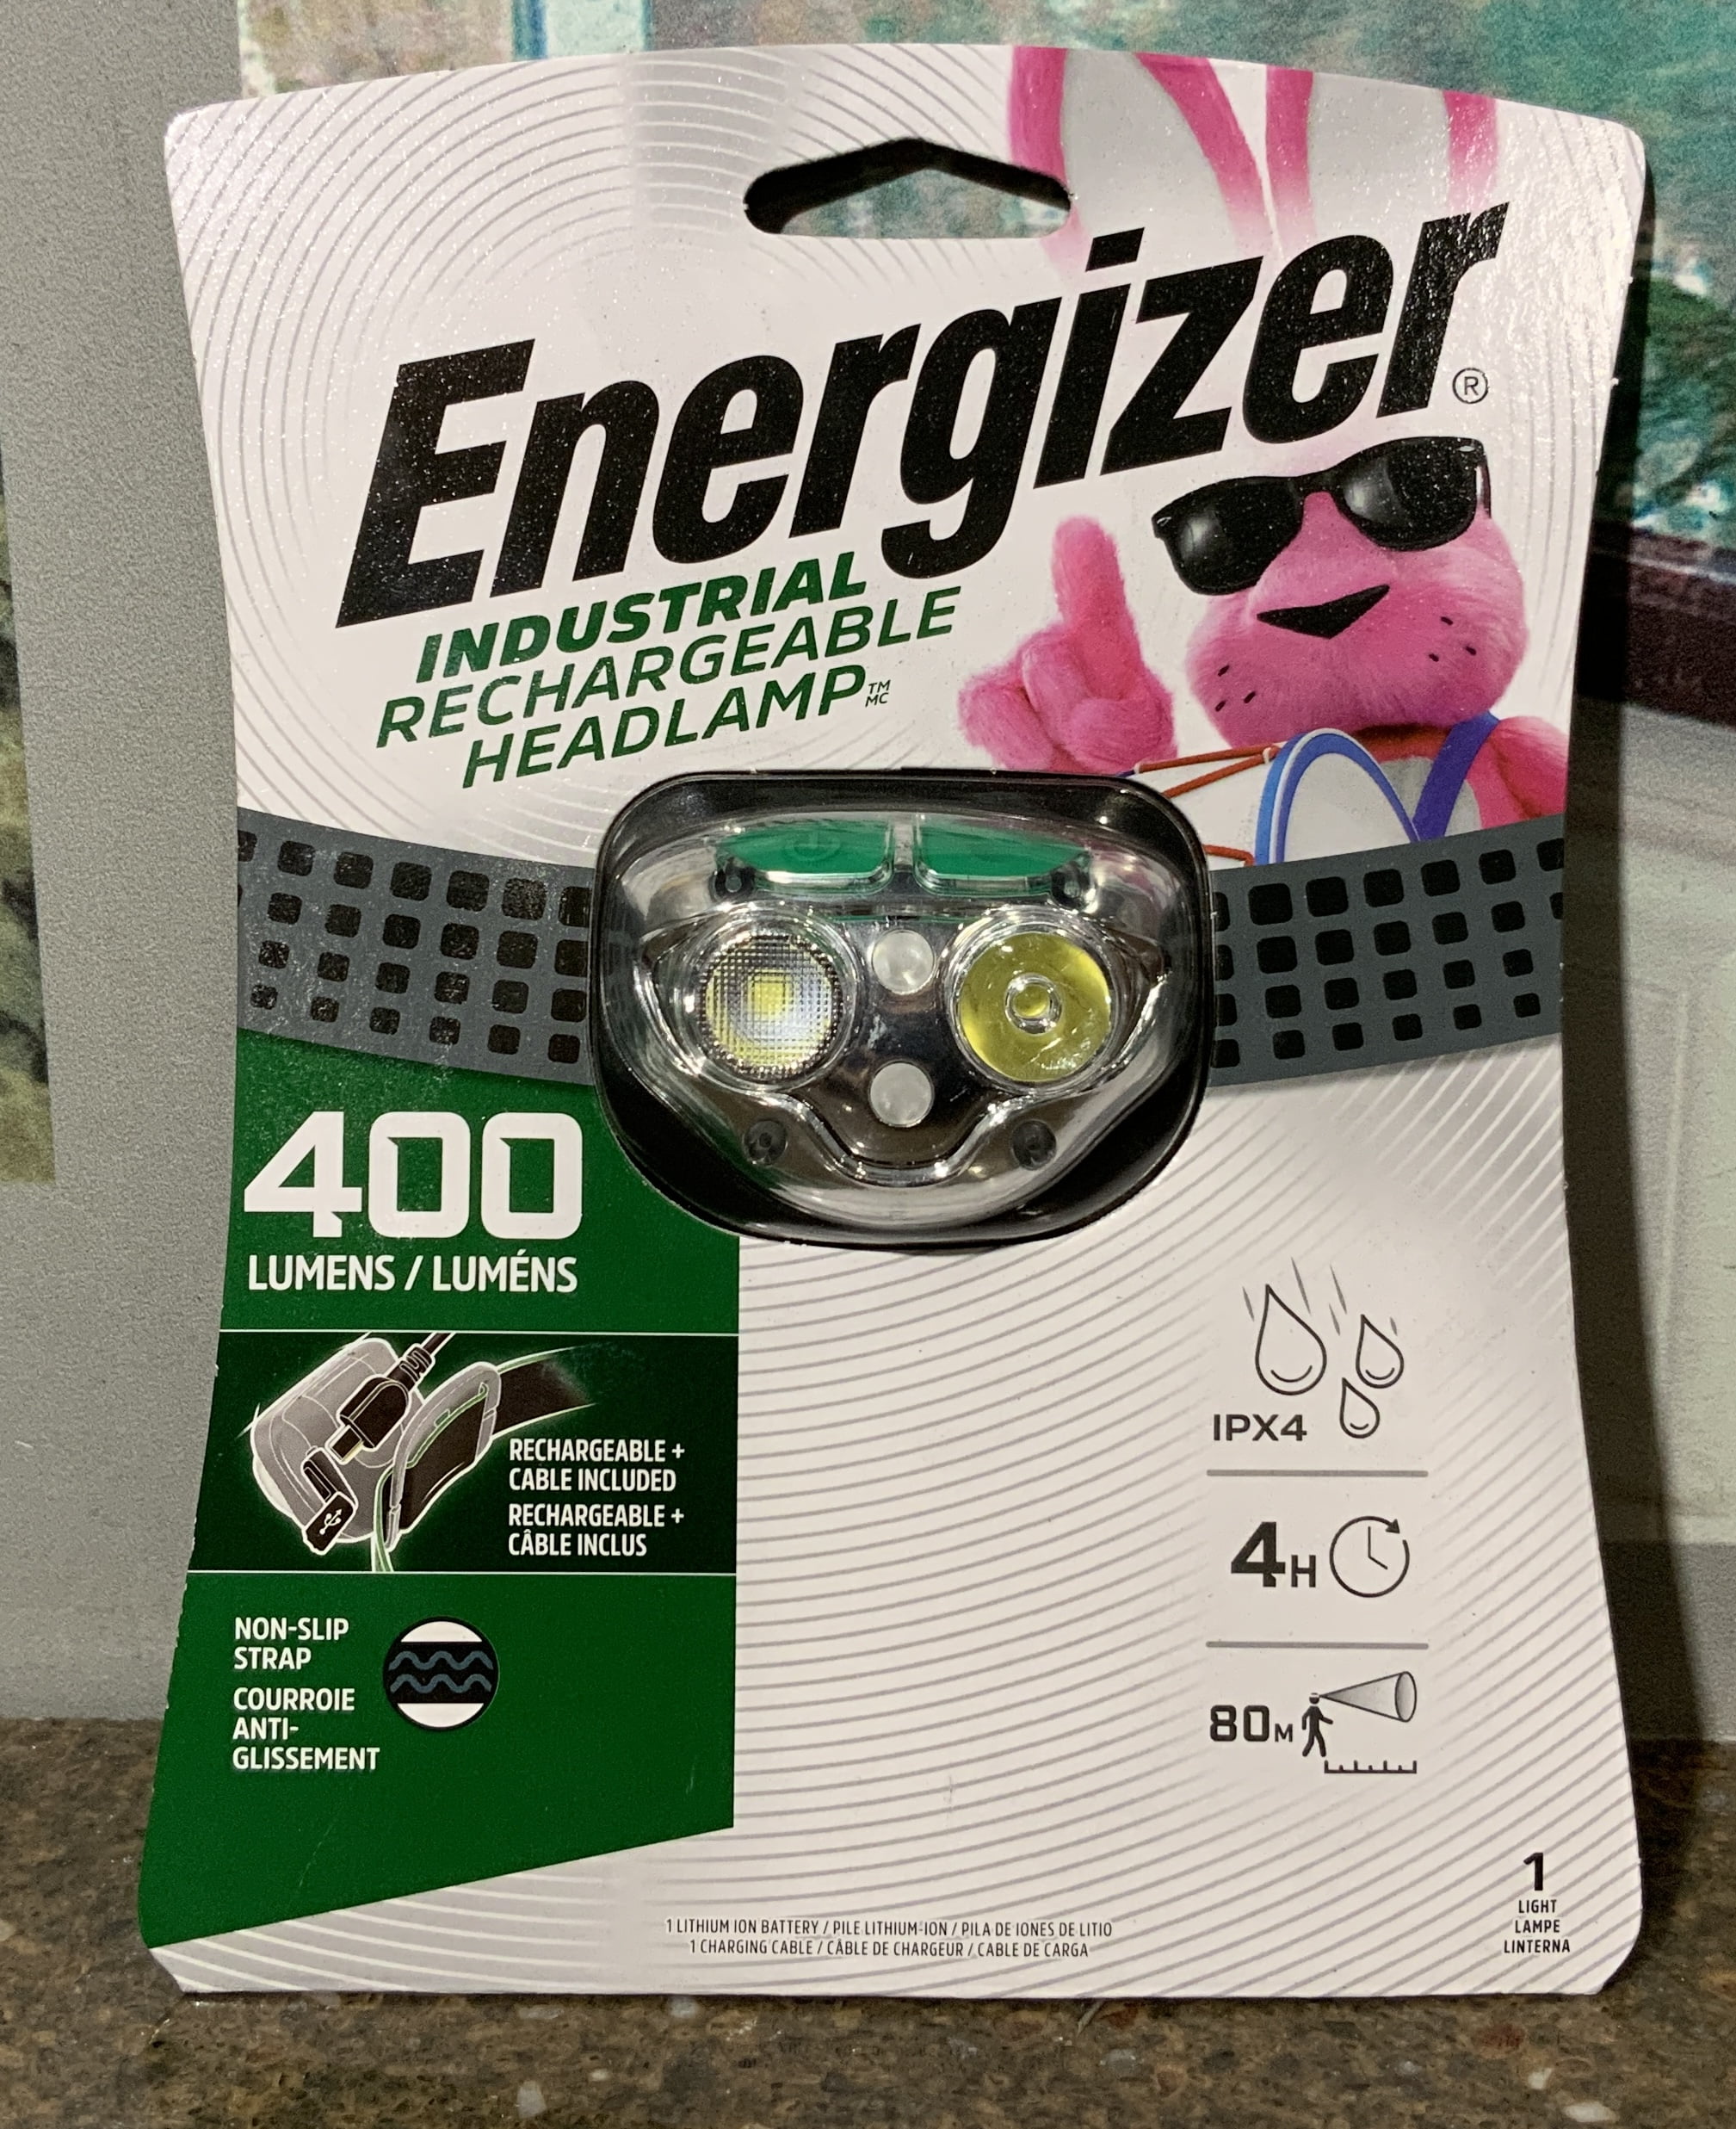 Energizer Industrial Rechargeable 4 Hour Headlamp 400 IPX4 Visibility 80m Lumens